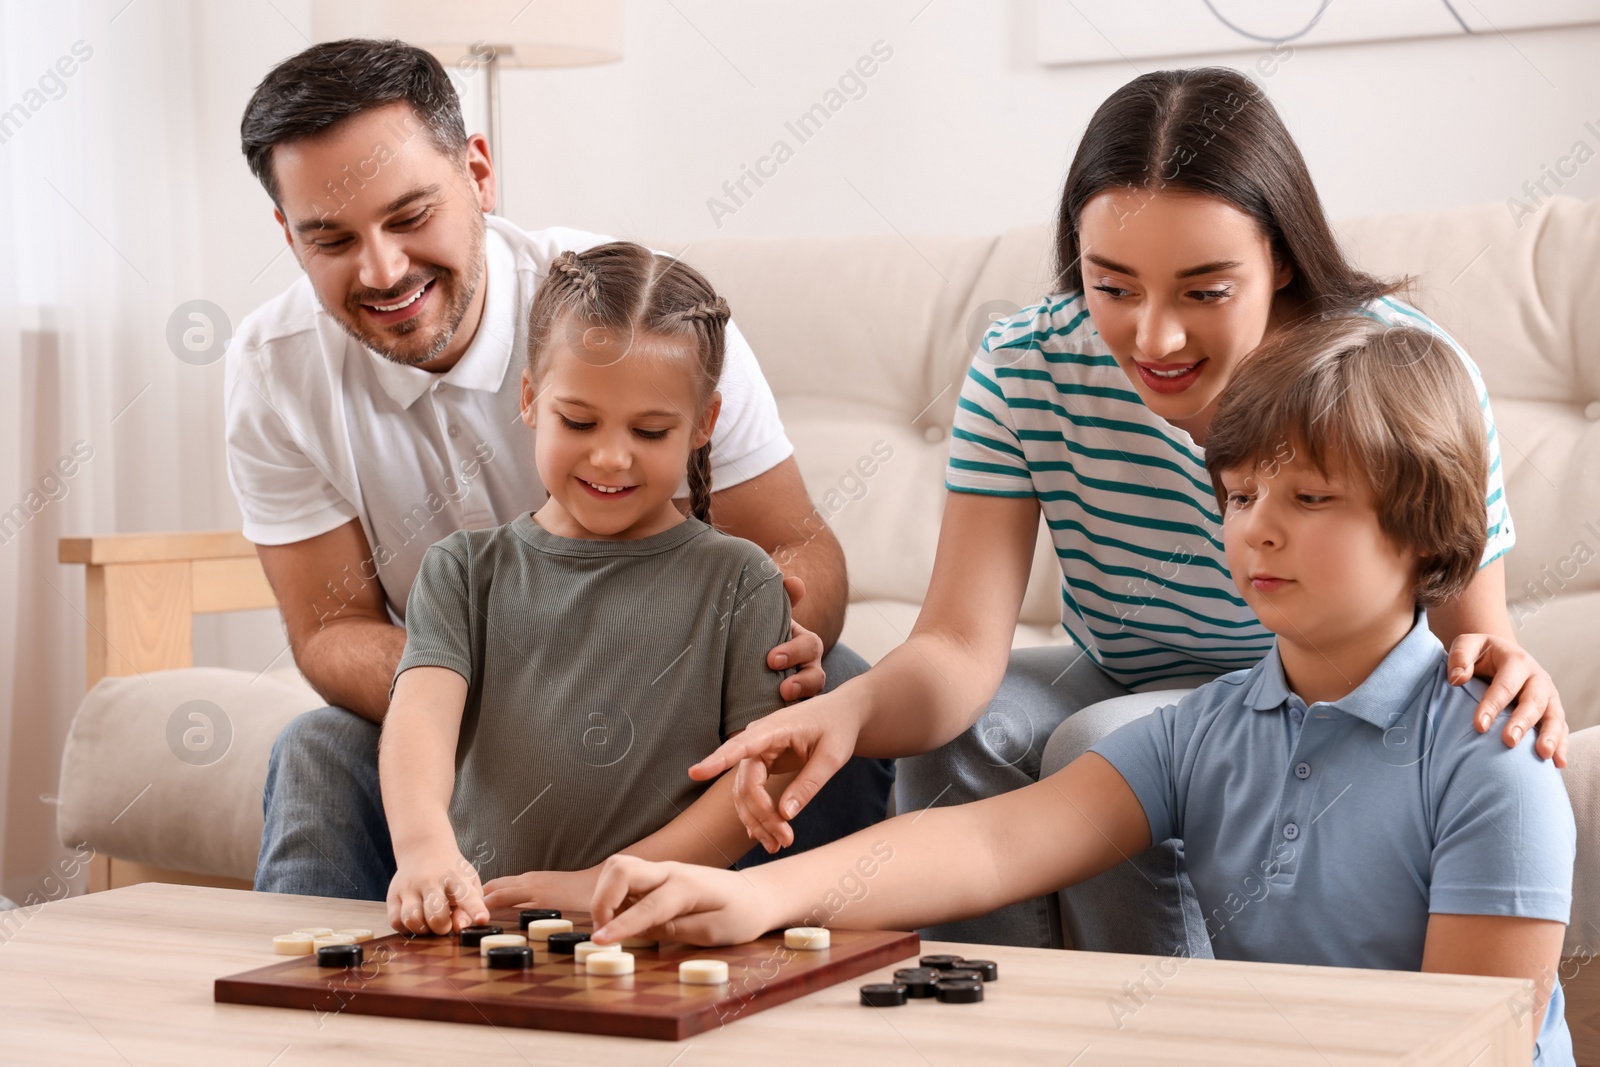 Photo of Parents playing checkers with children at table in room